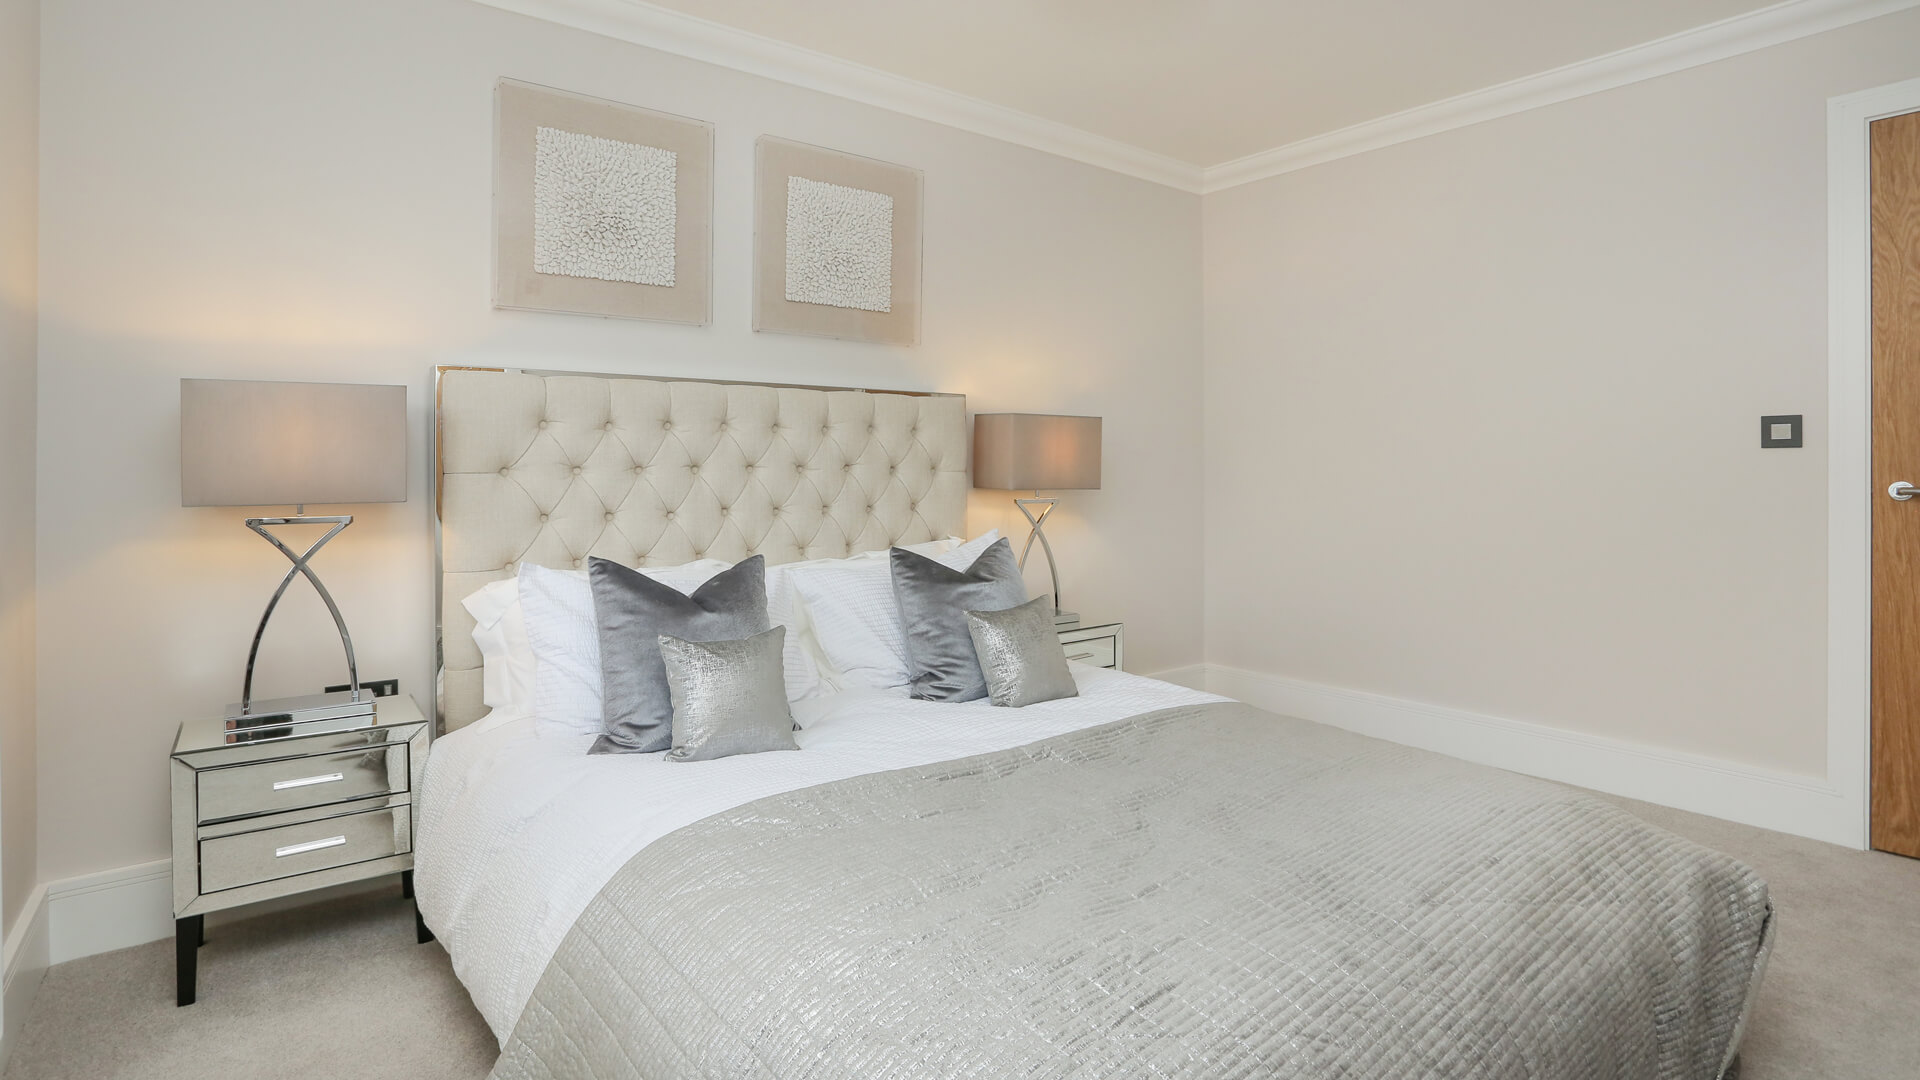 Dressed double bed at Woodside court